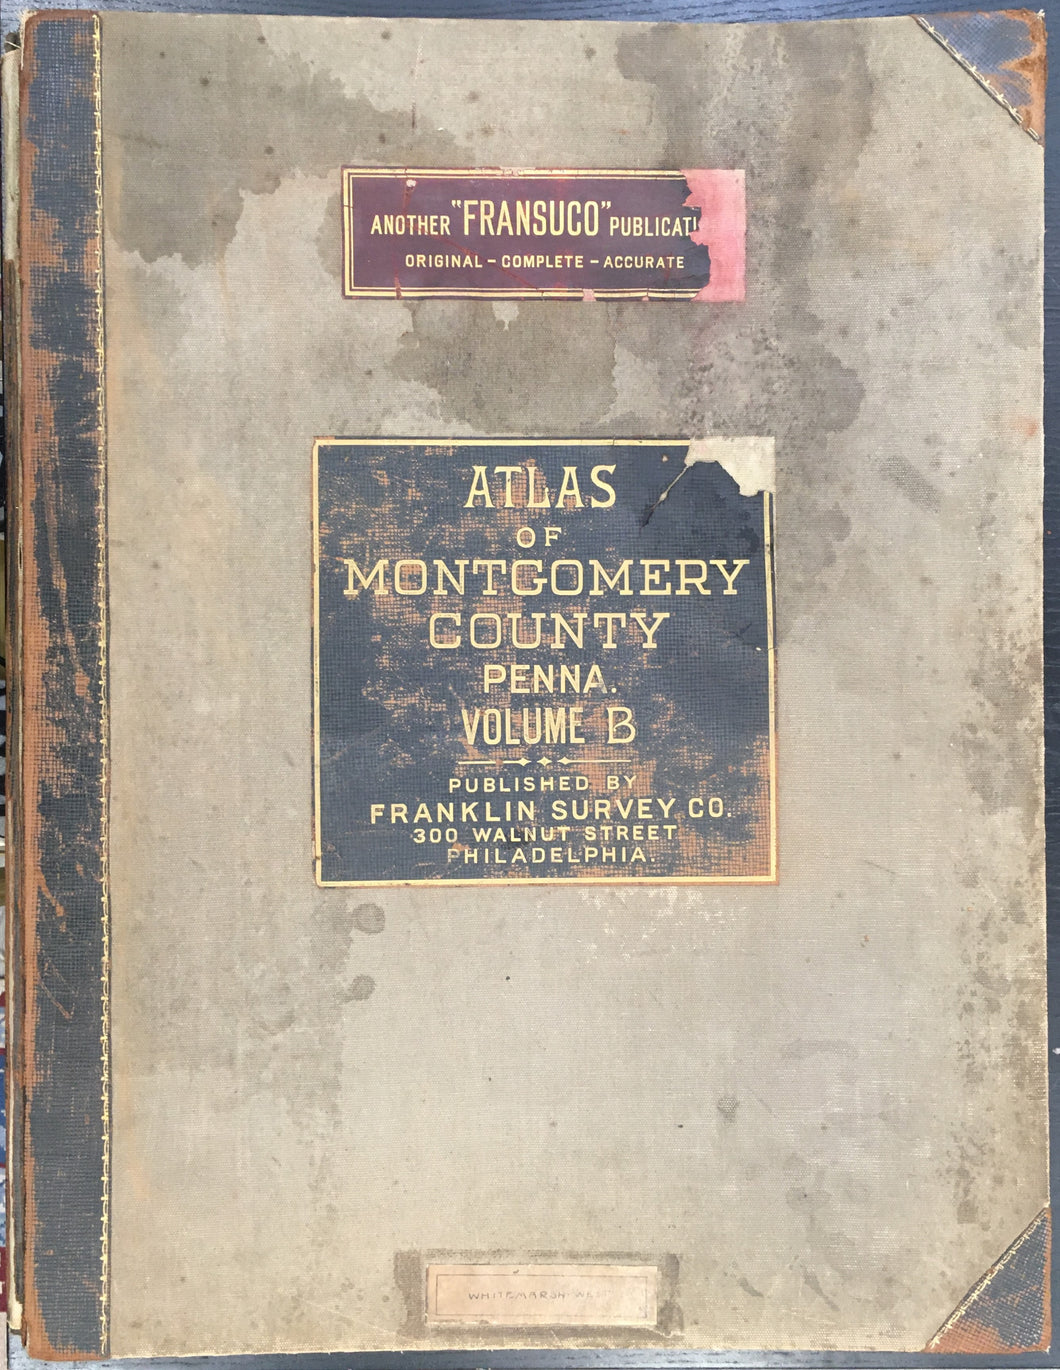 Franklin Survey Co.  “Atlas of Montgomery County Volume B.”  [Townships Plymouth, Whitpain, East and West Norriton, Lower Providence, Worcester, Towamencin and Norristown].  1935